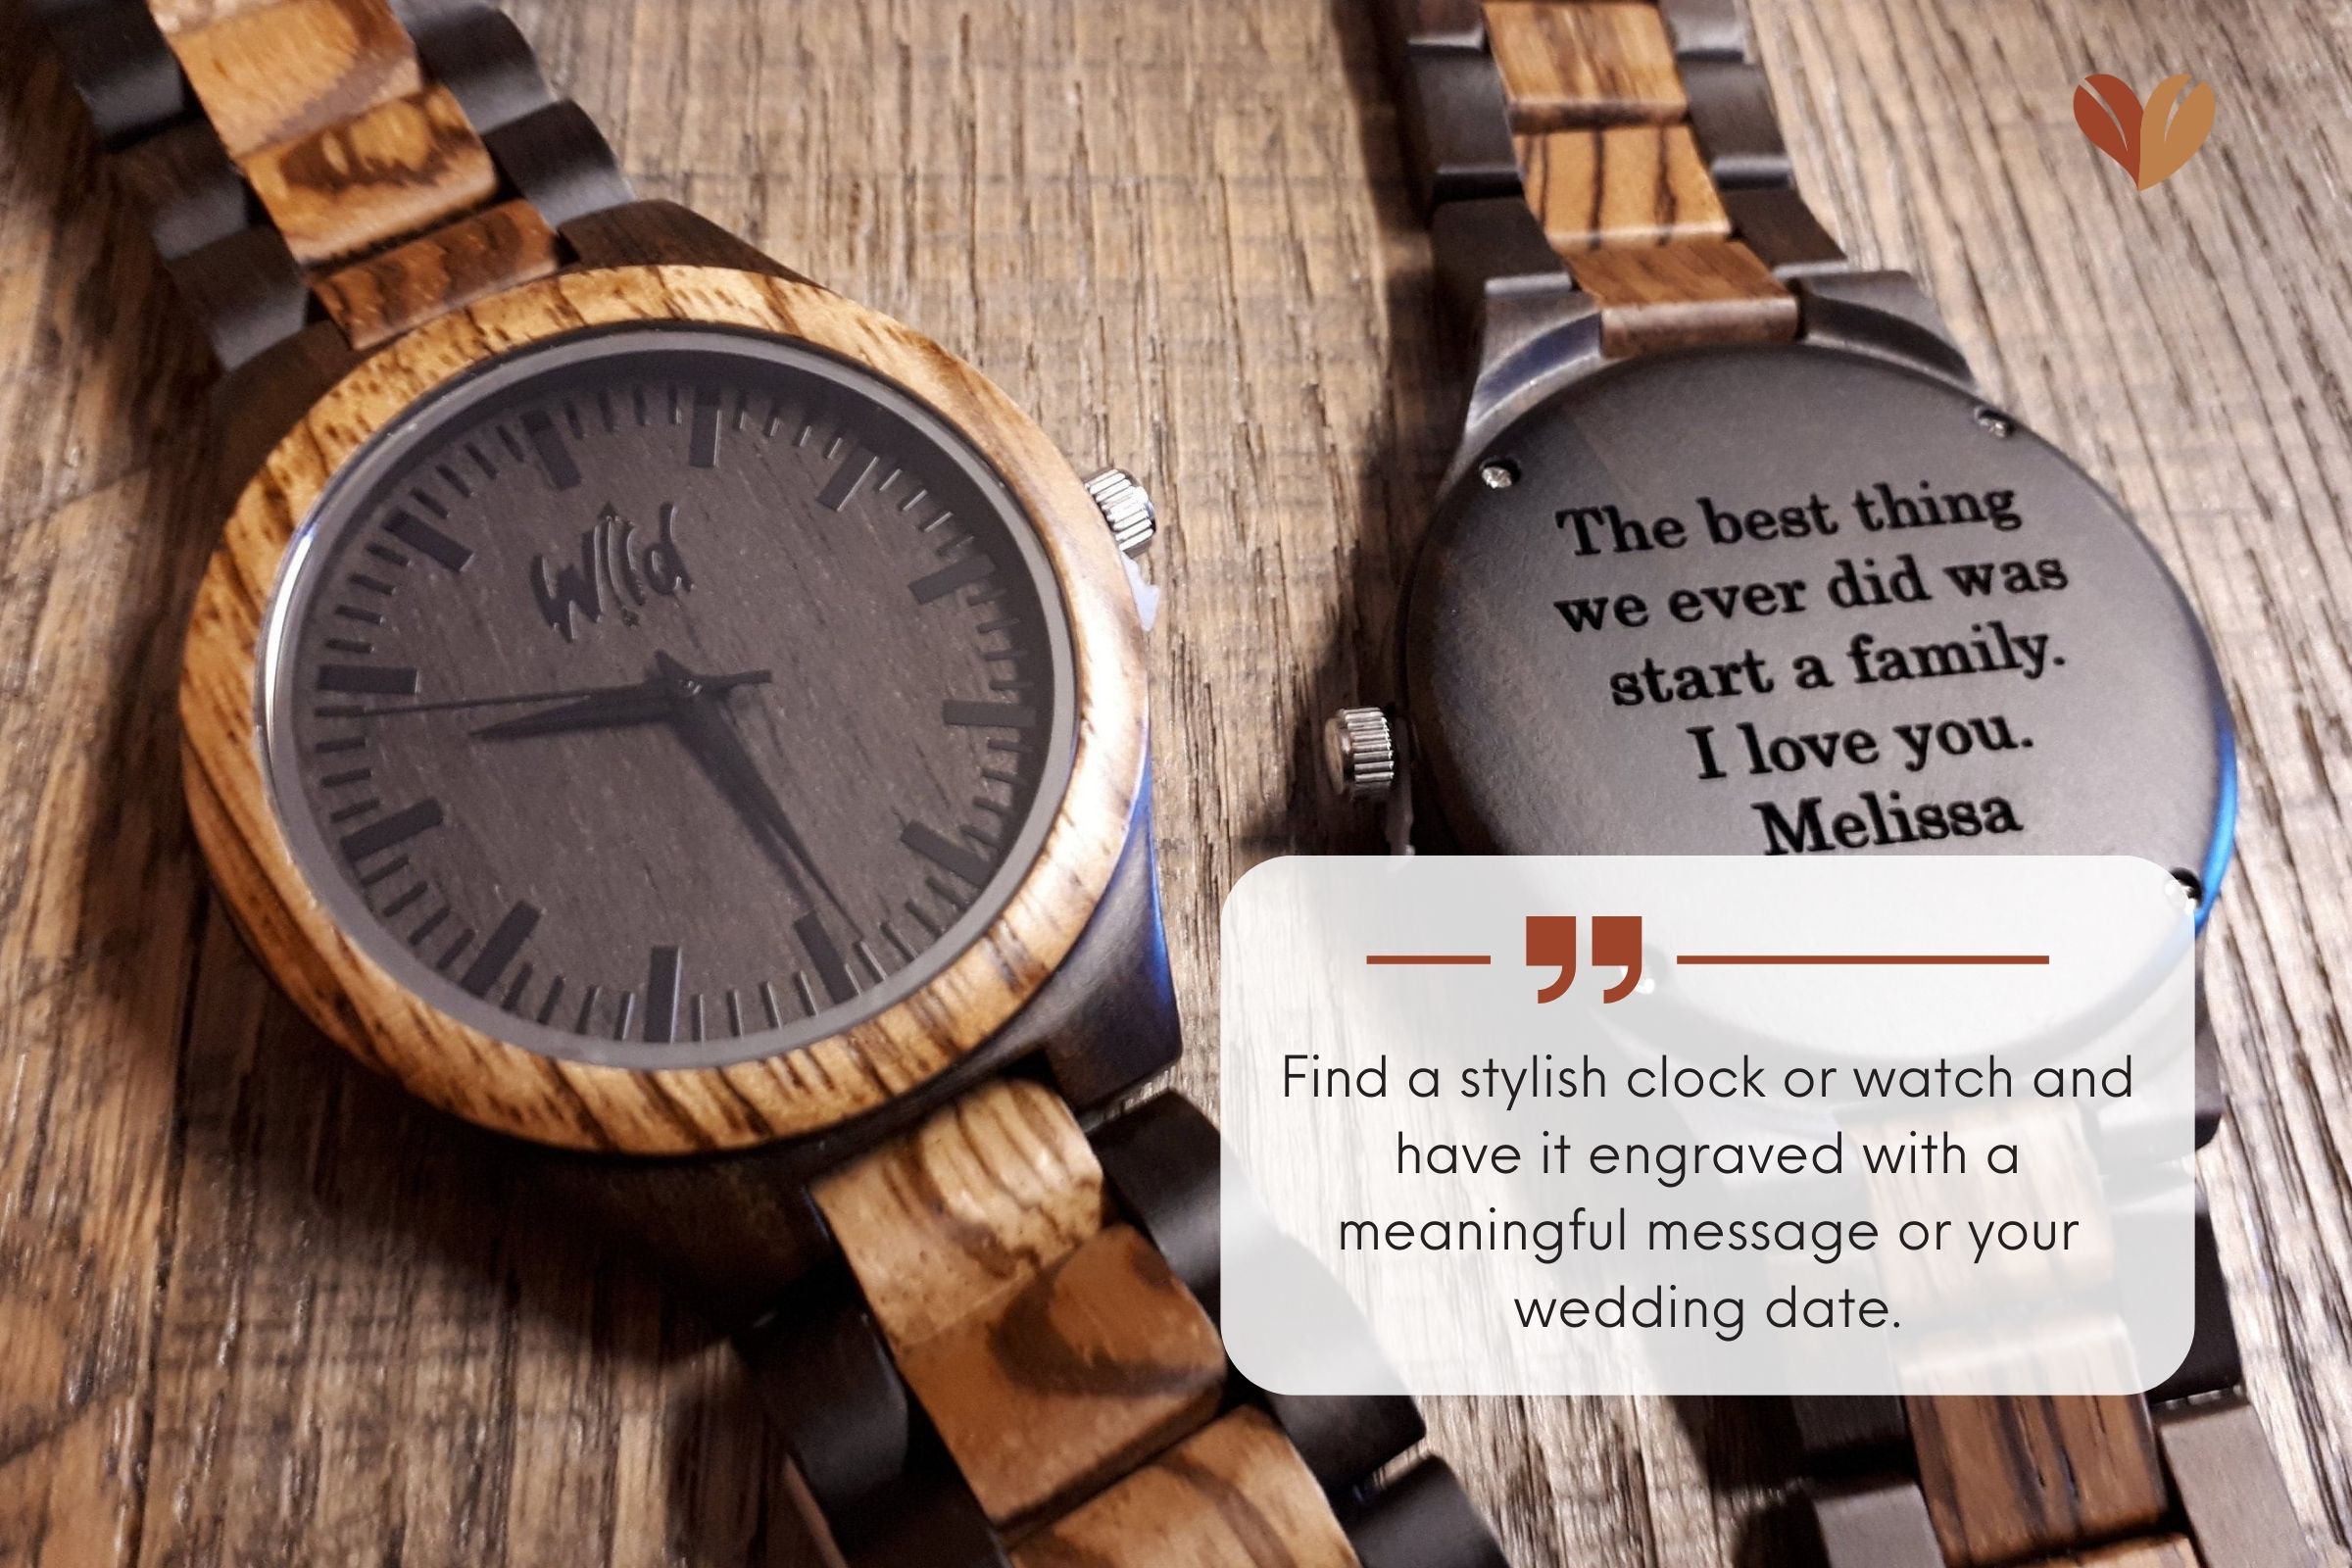 Customized her clock on 1st wedding anniversary gifts for wife